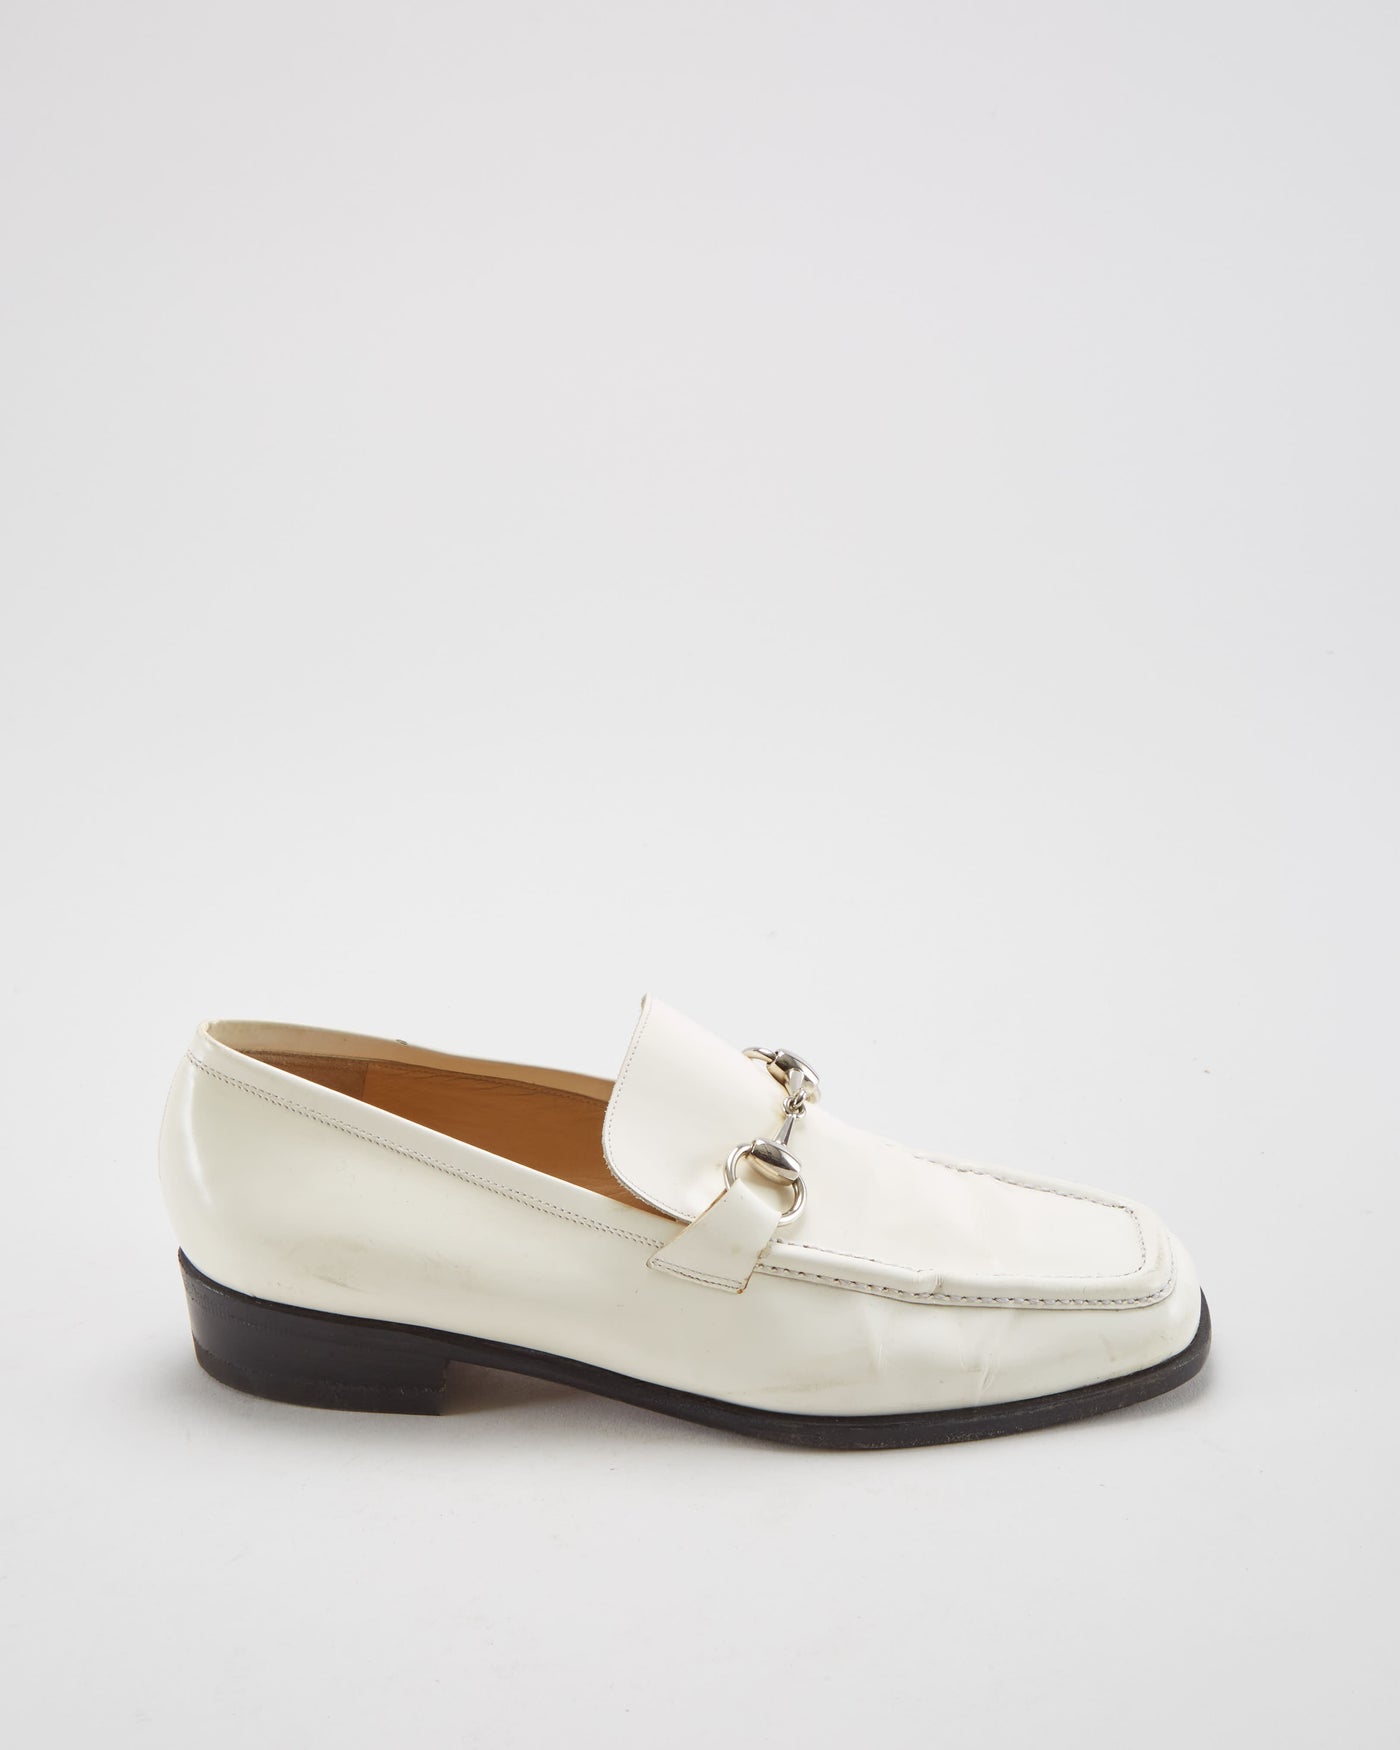 Gucci White Leather Loafers - Womens UK 4.5